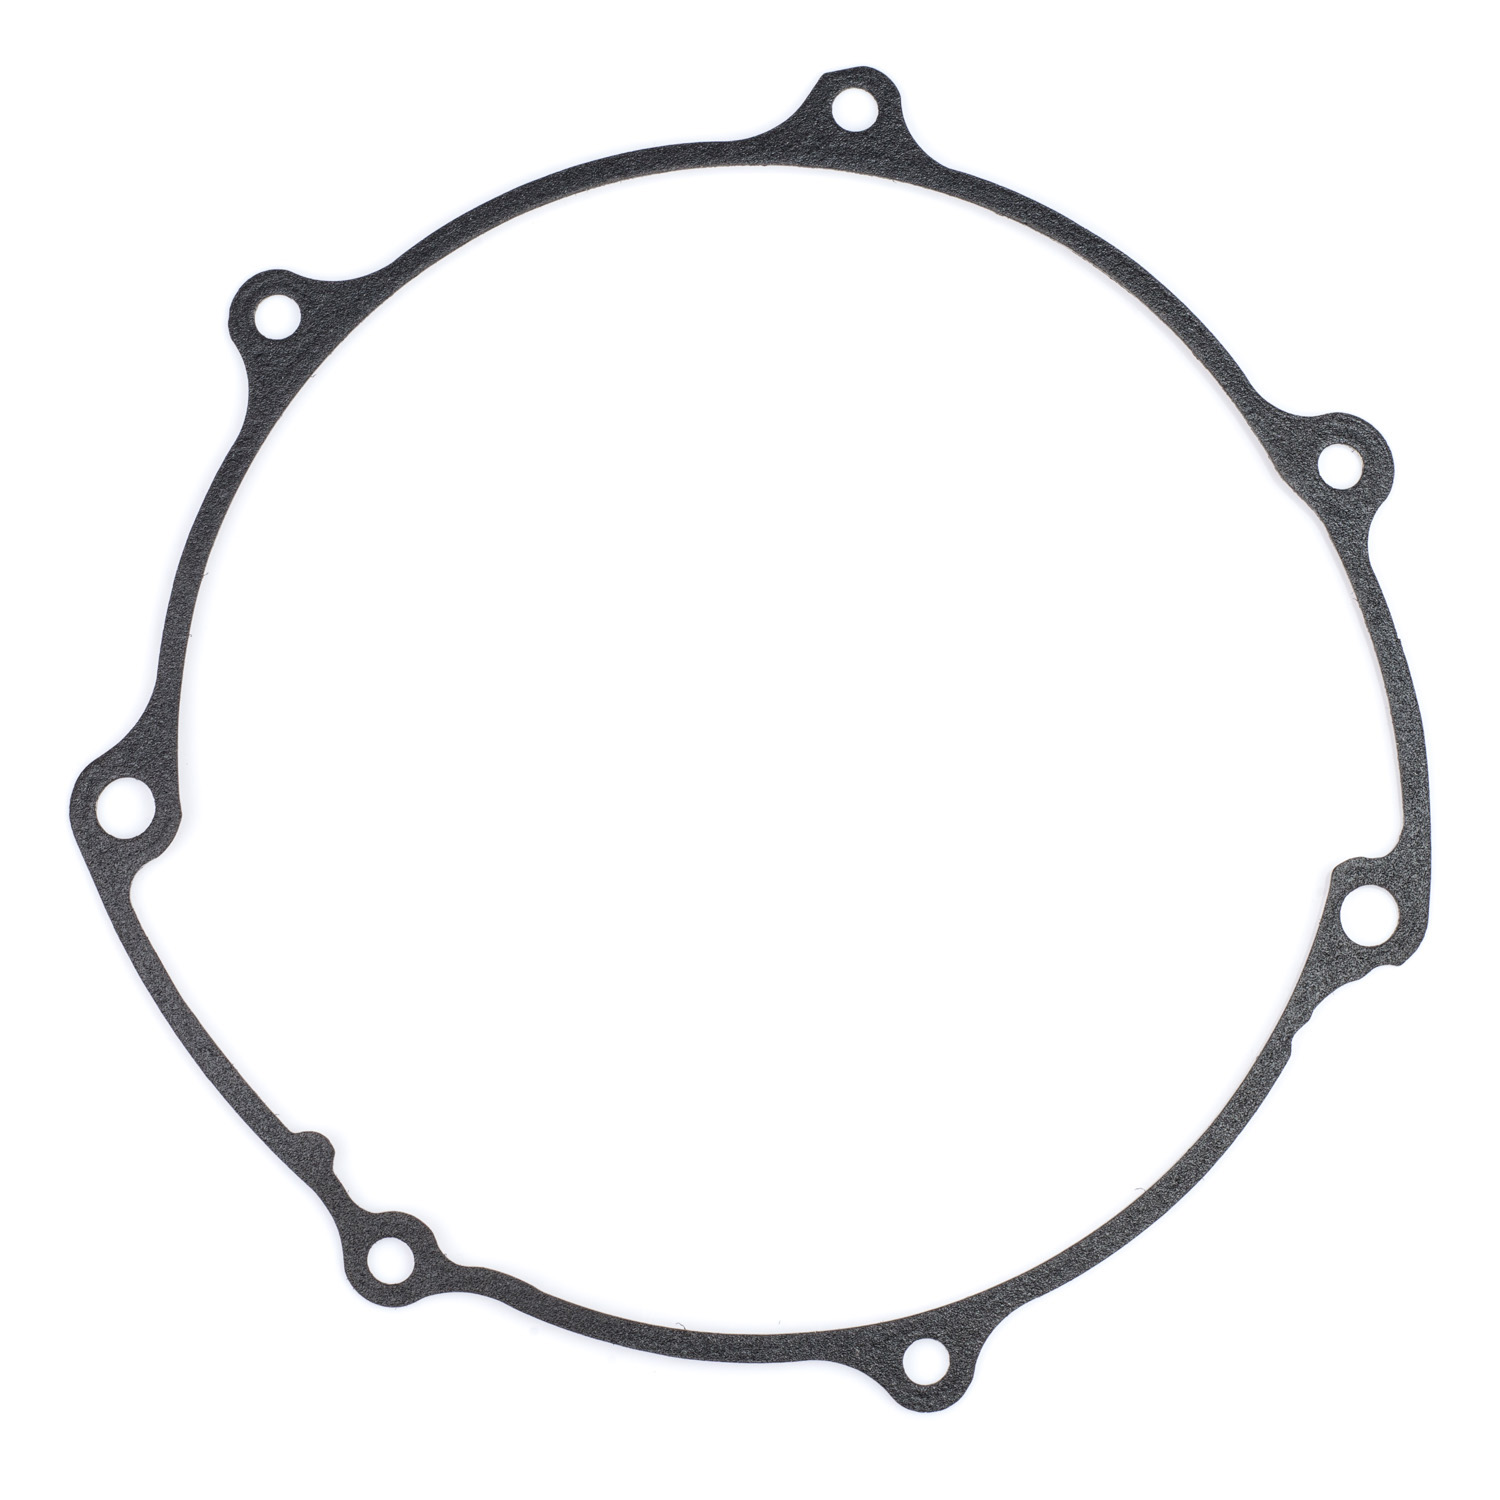 WR450F Generator Cover Gasket 2003-2015